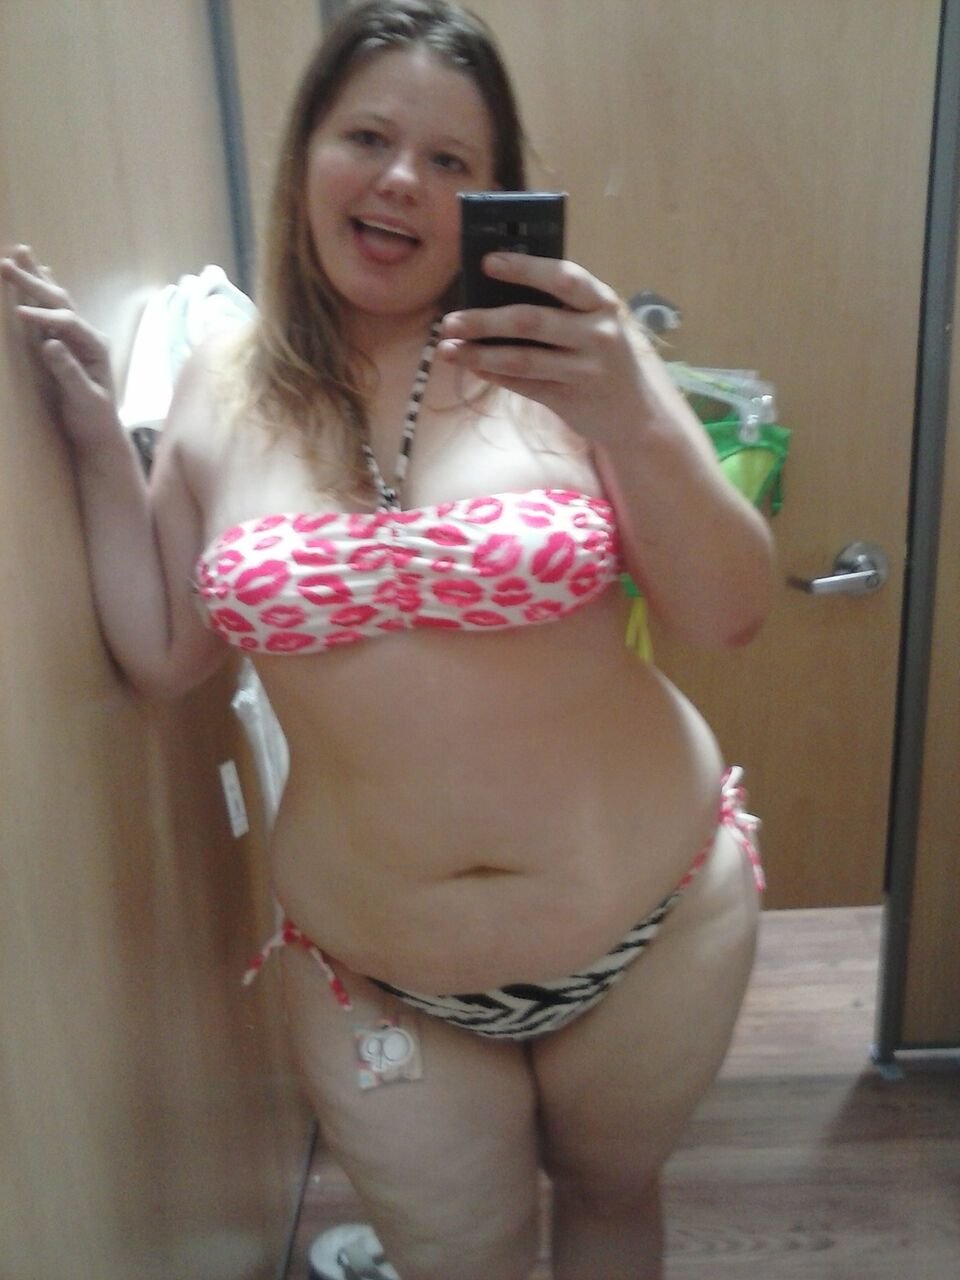 Thinking about getting this bikini for this summer. Whatcha think?